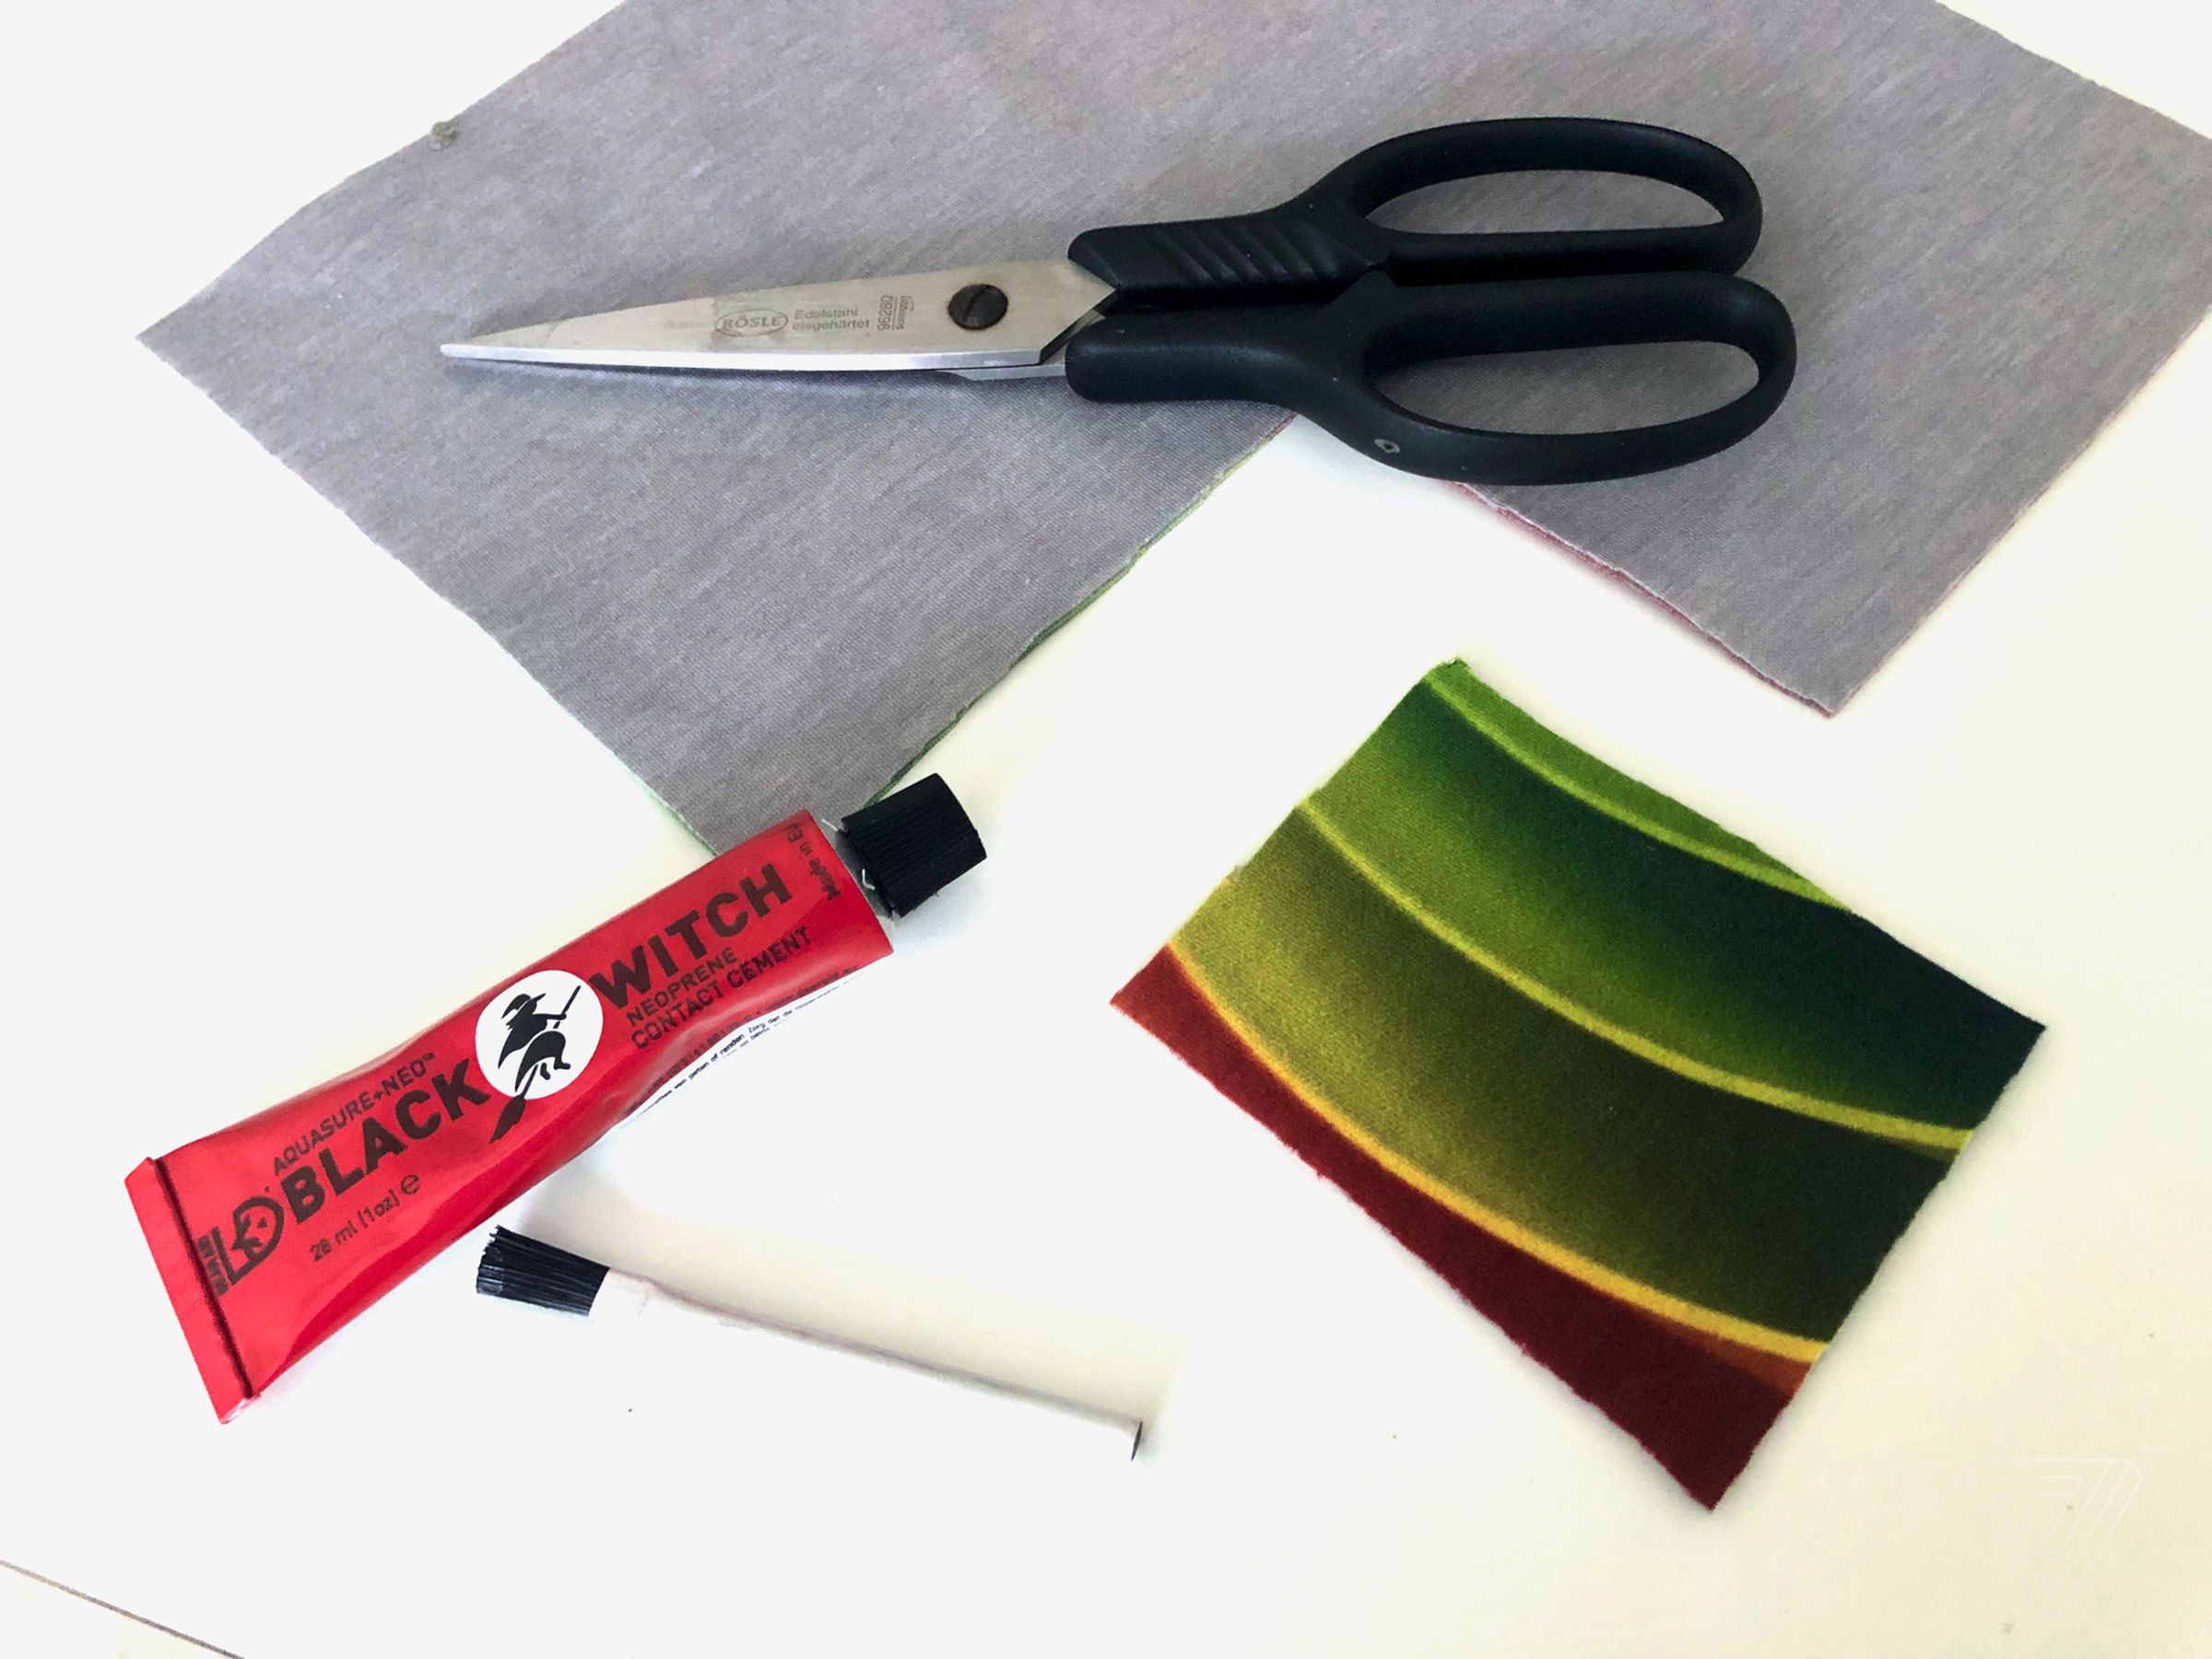 You’ll need scissors, neoprene fabric, and either neoprene glue (easy!) or the ability to sew (easy for some!).